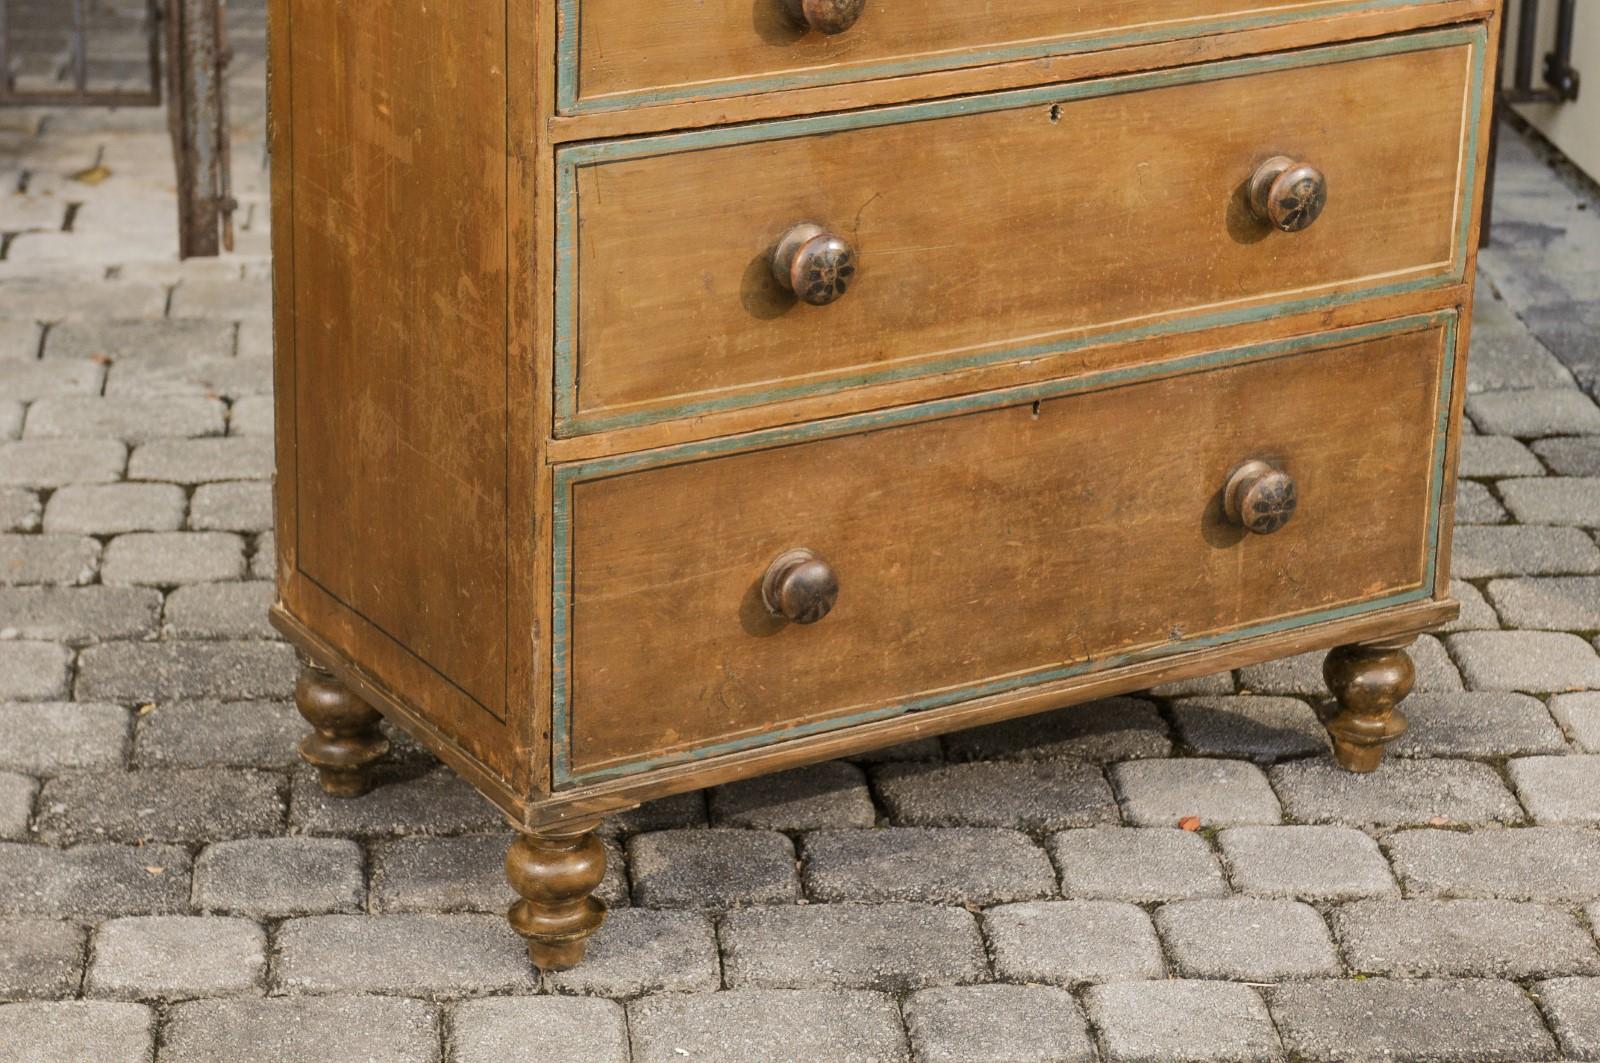 English 1850s Painted Wood Five-Drawer Chest with Turned Feet and Patina (Gemalt)